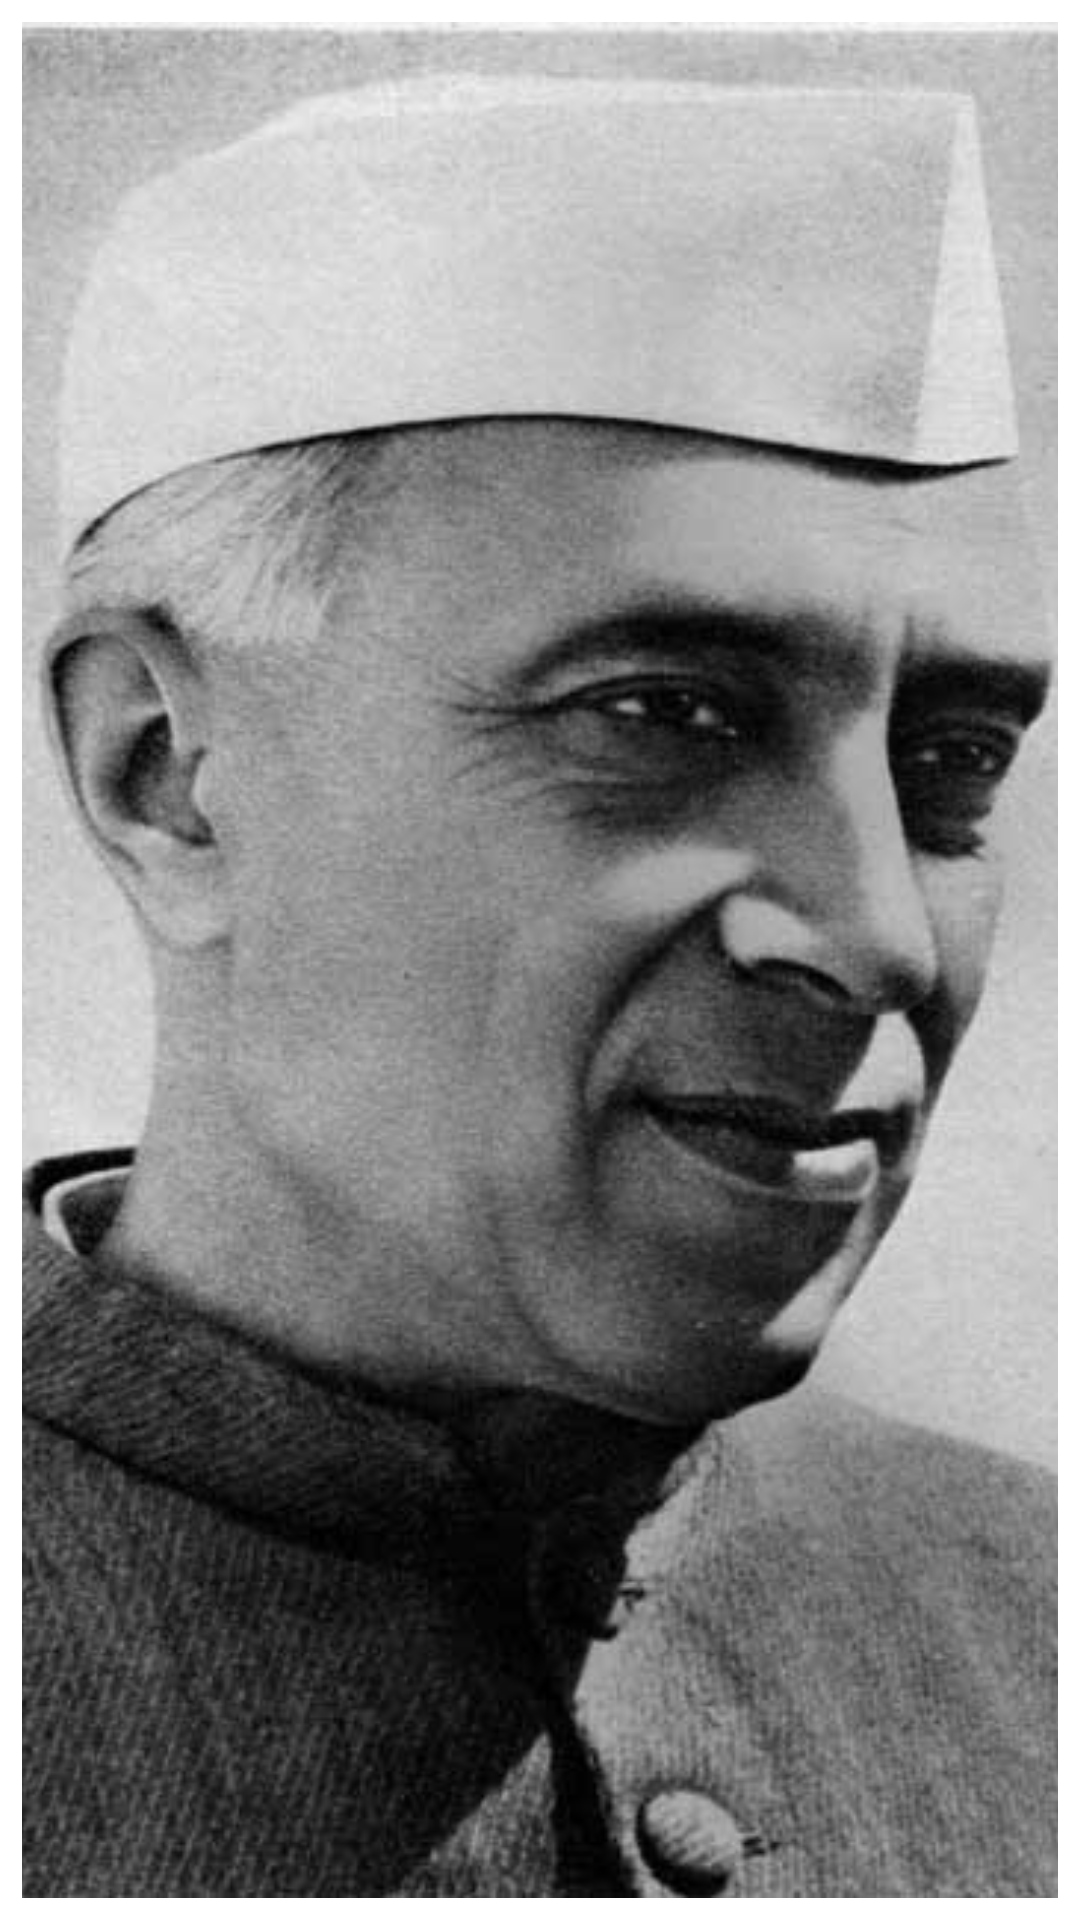 Childrens Day Poster| Children's Day drawing 2022: Easy Children's Day  posters for Pandit Jawaharlal Nehru's birthday on November 14 | Viral News,  Times Now